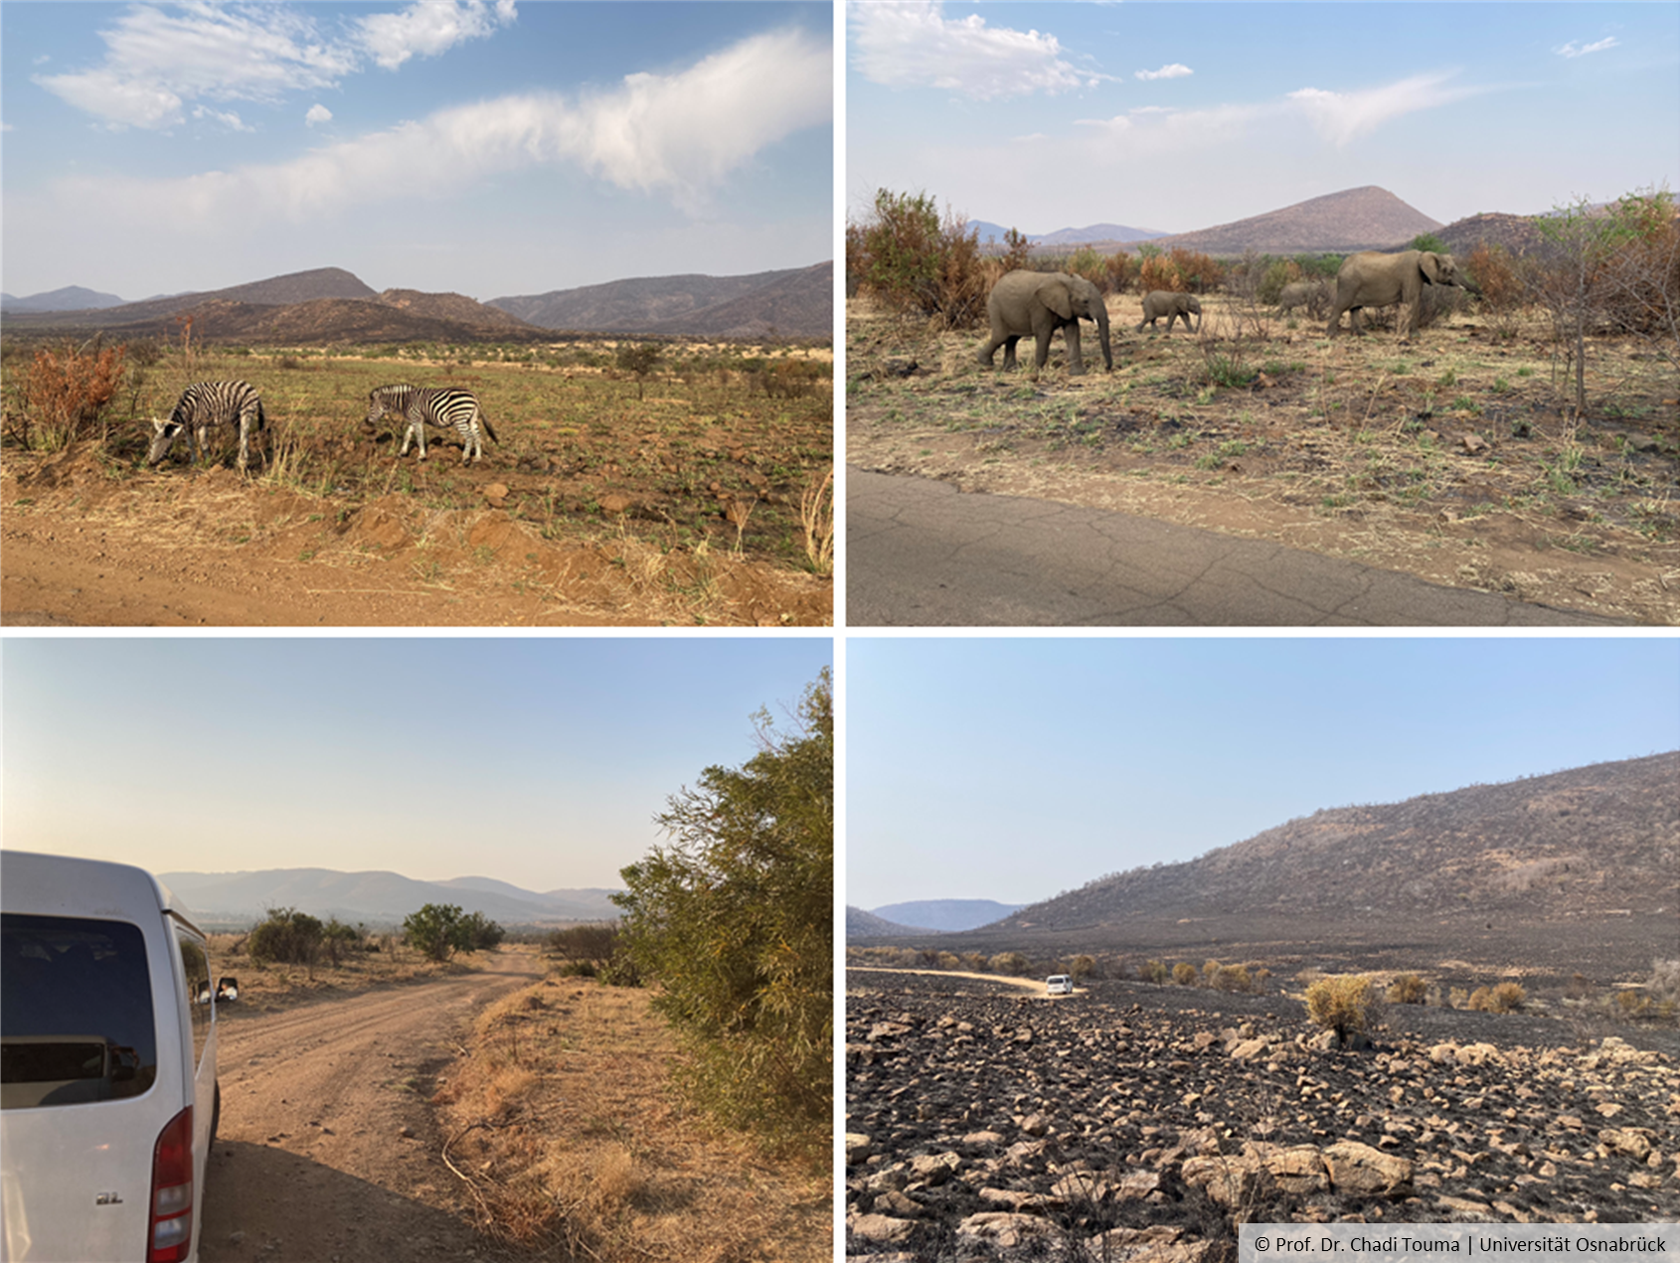 Four images combined; image 1: grazing zebras; image 2: elephants of varying sizes; image 3: An off-road vehicle on a gravel road; image 4: A scorched landscape;